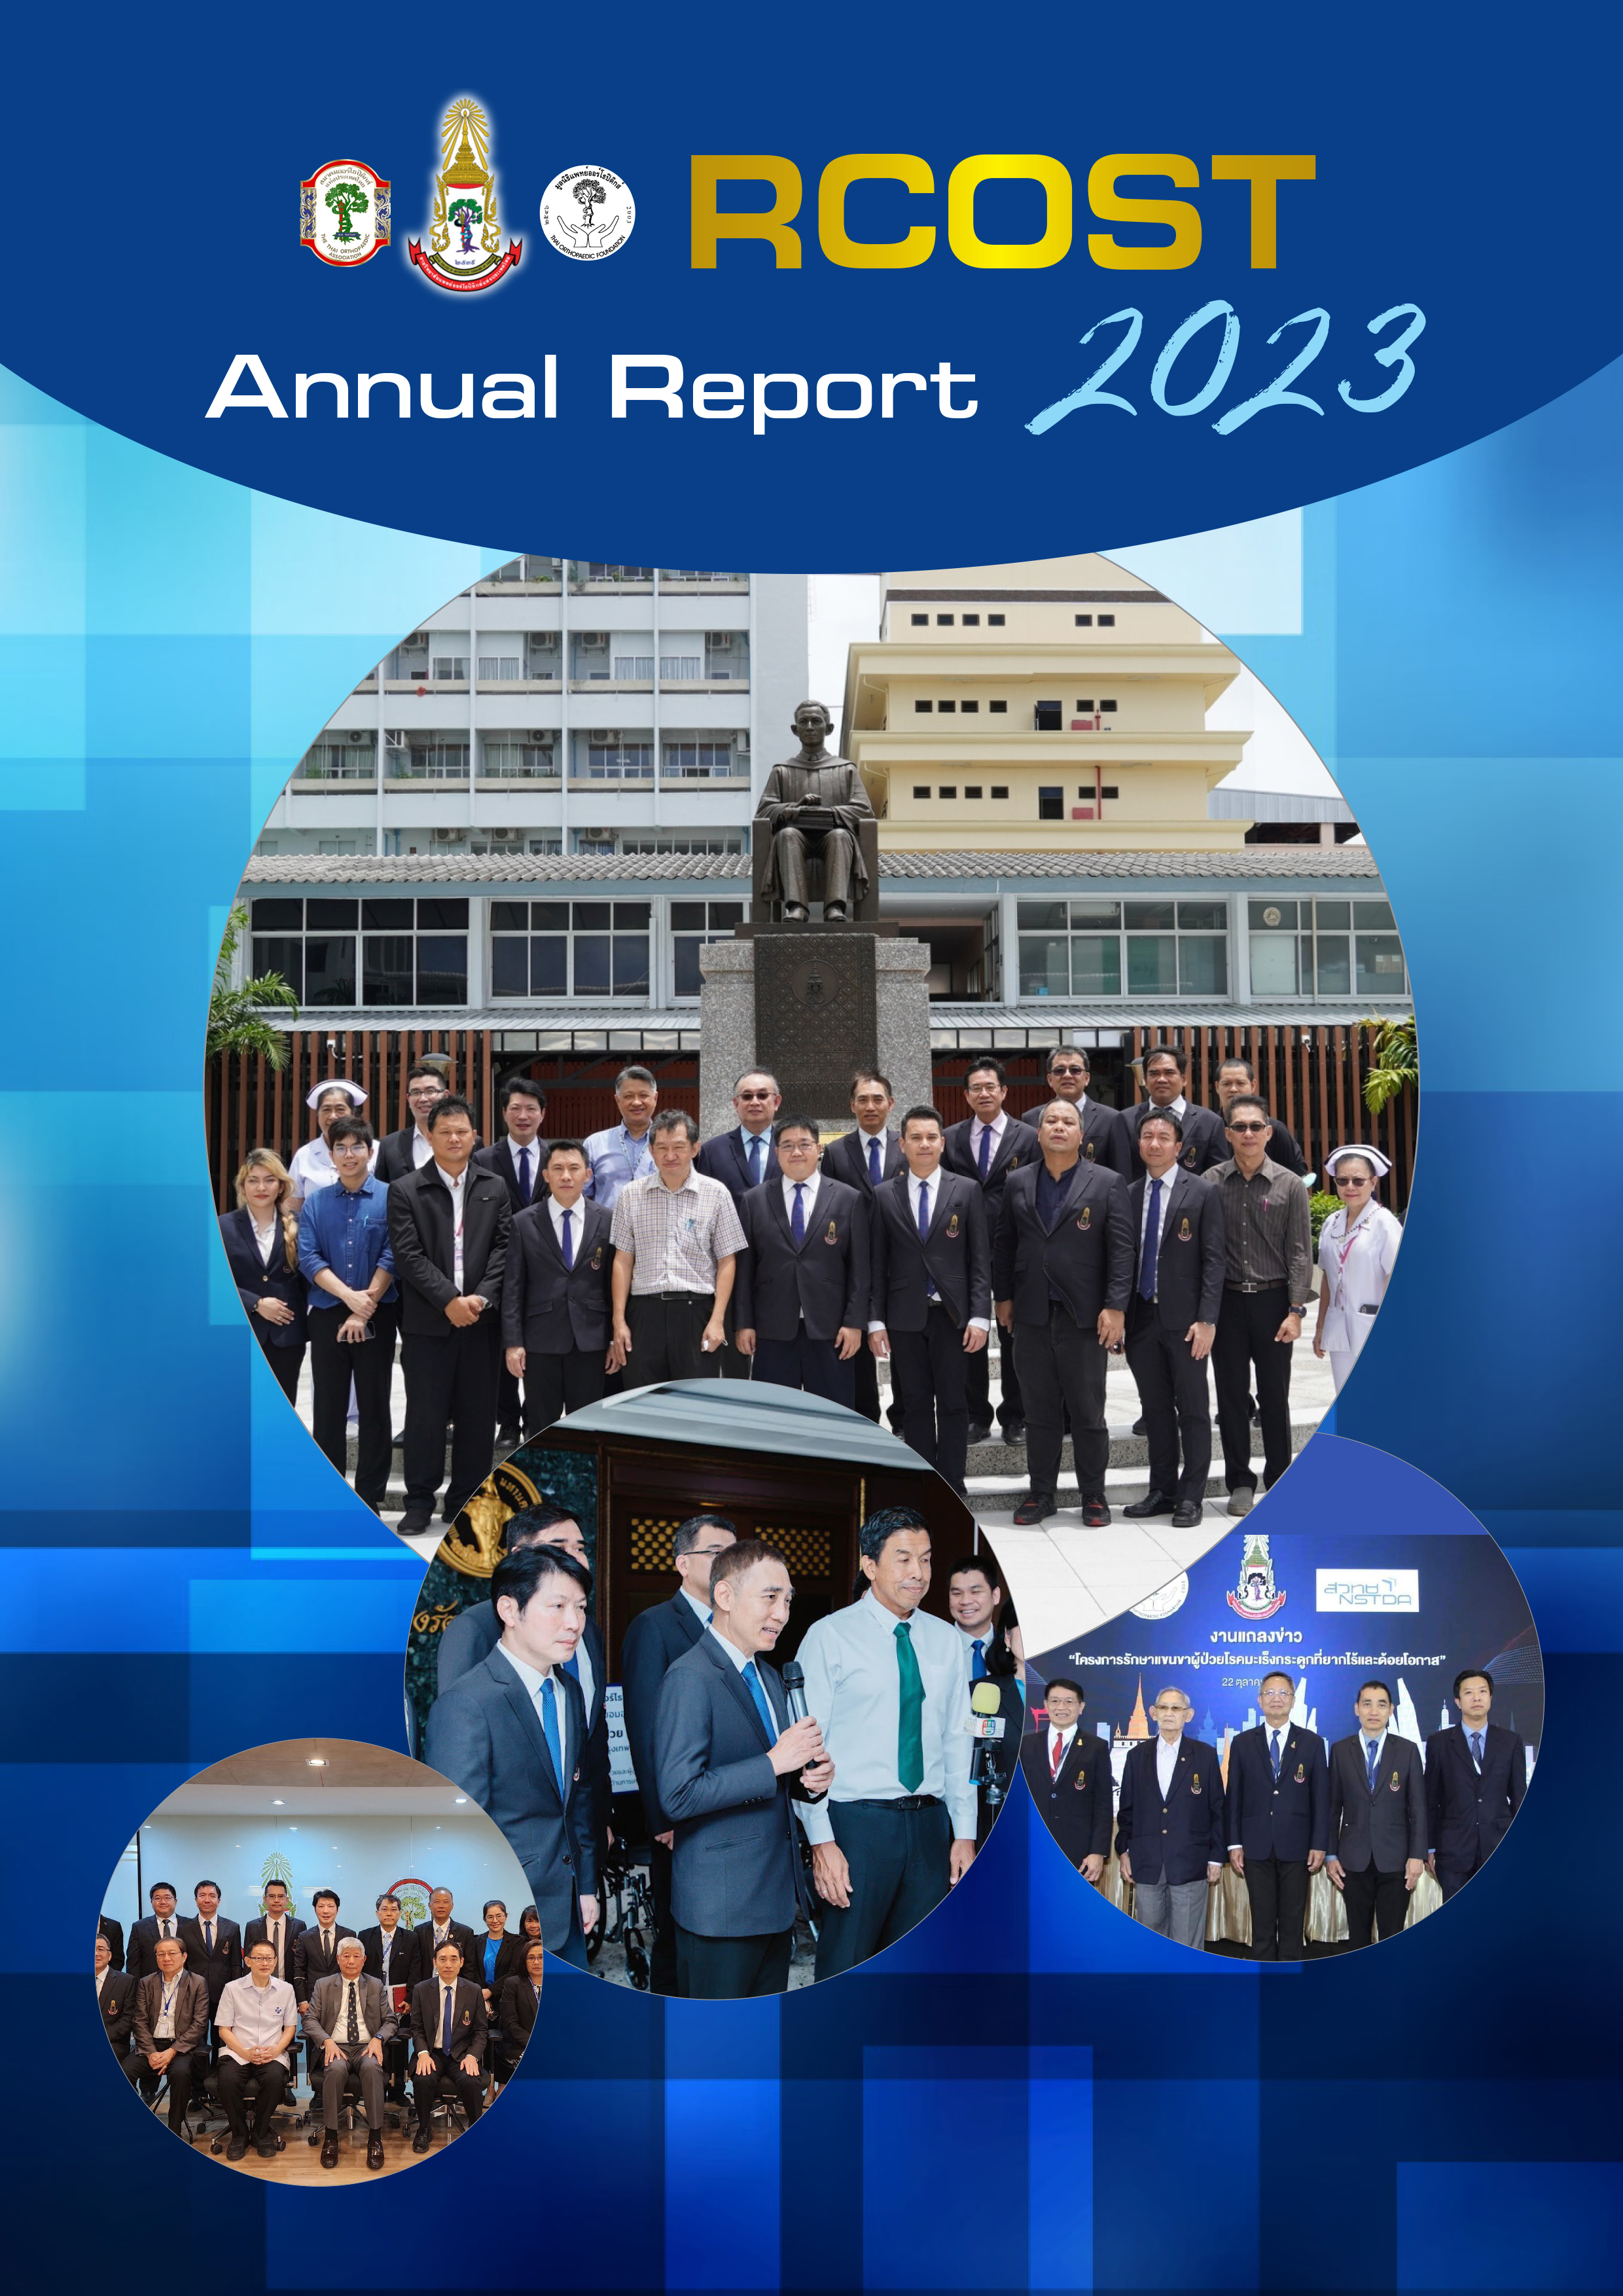  Annual Report RCOST 2023